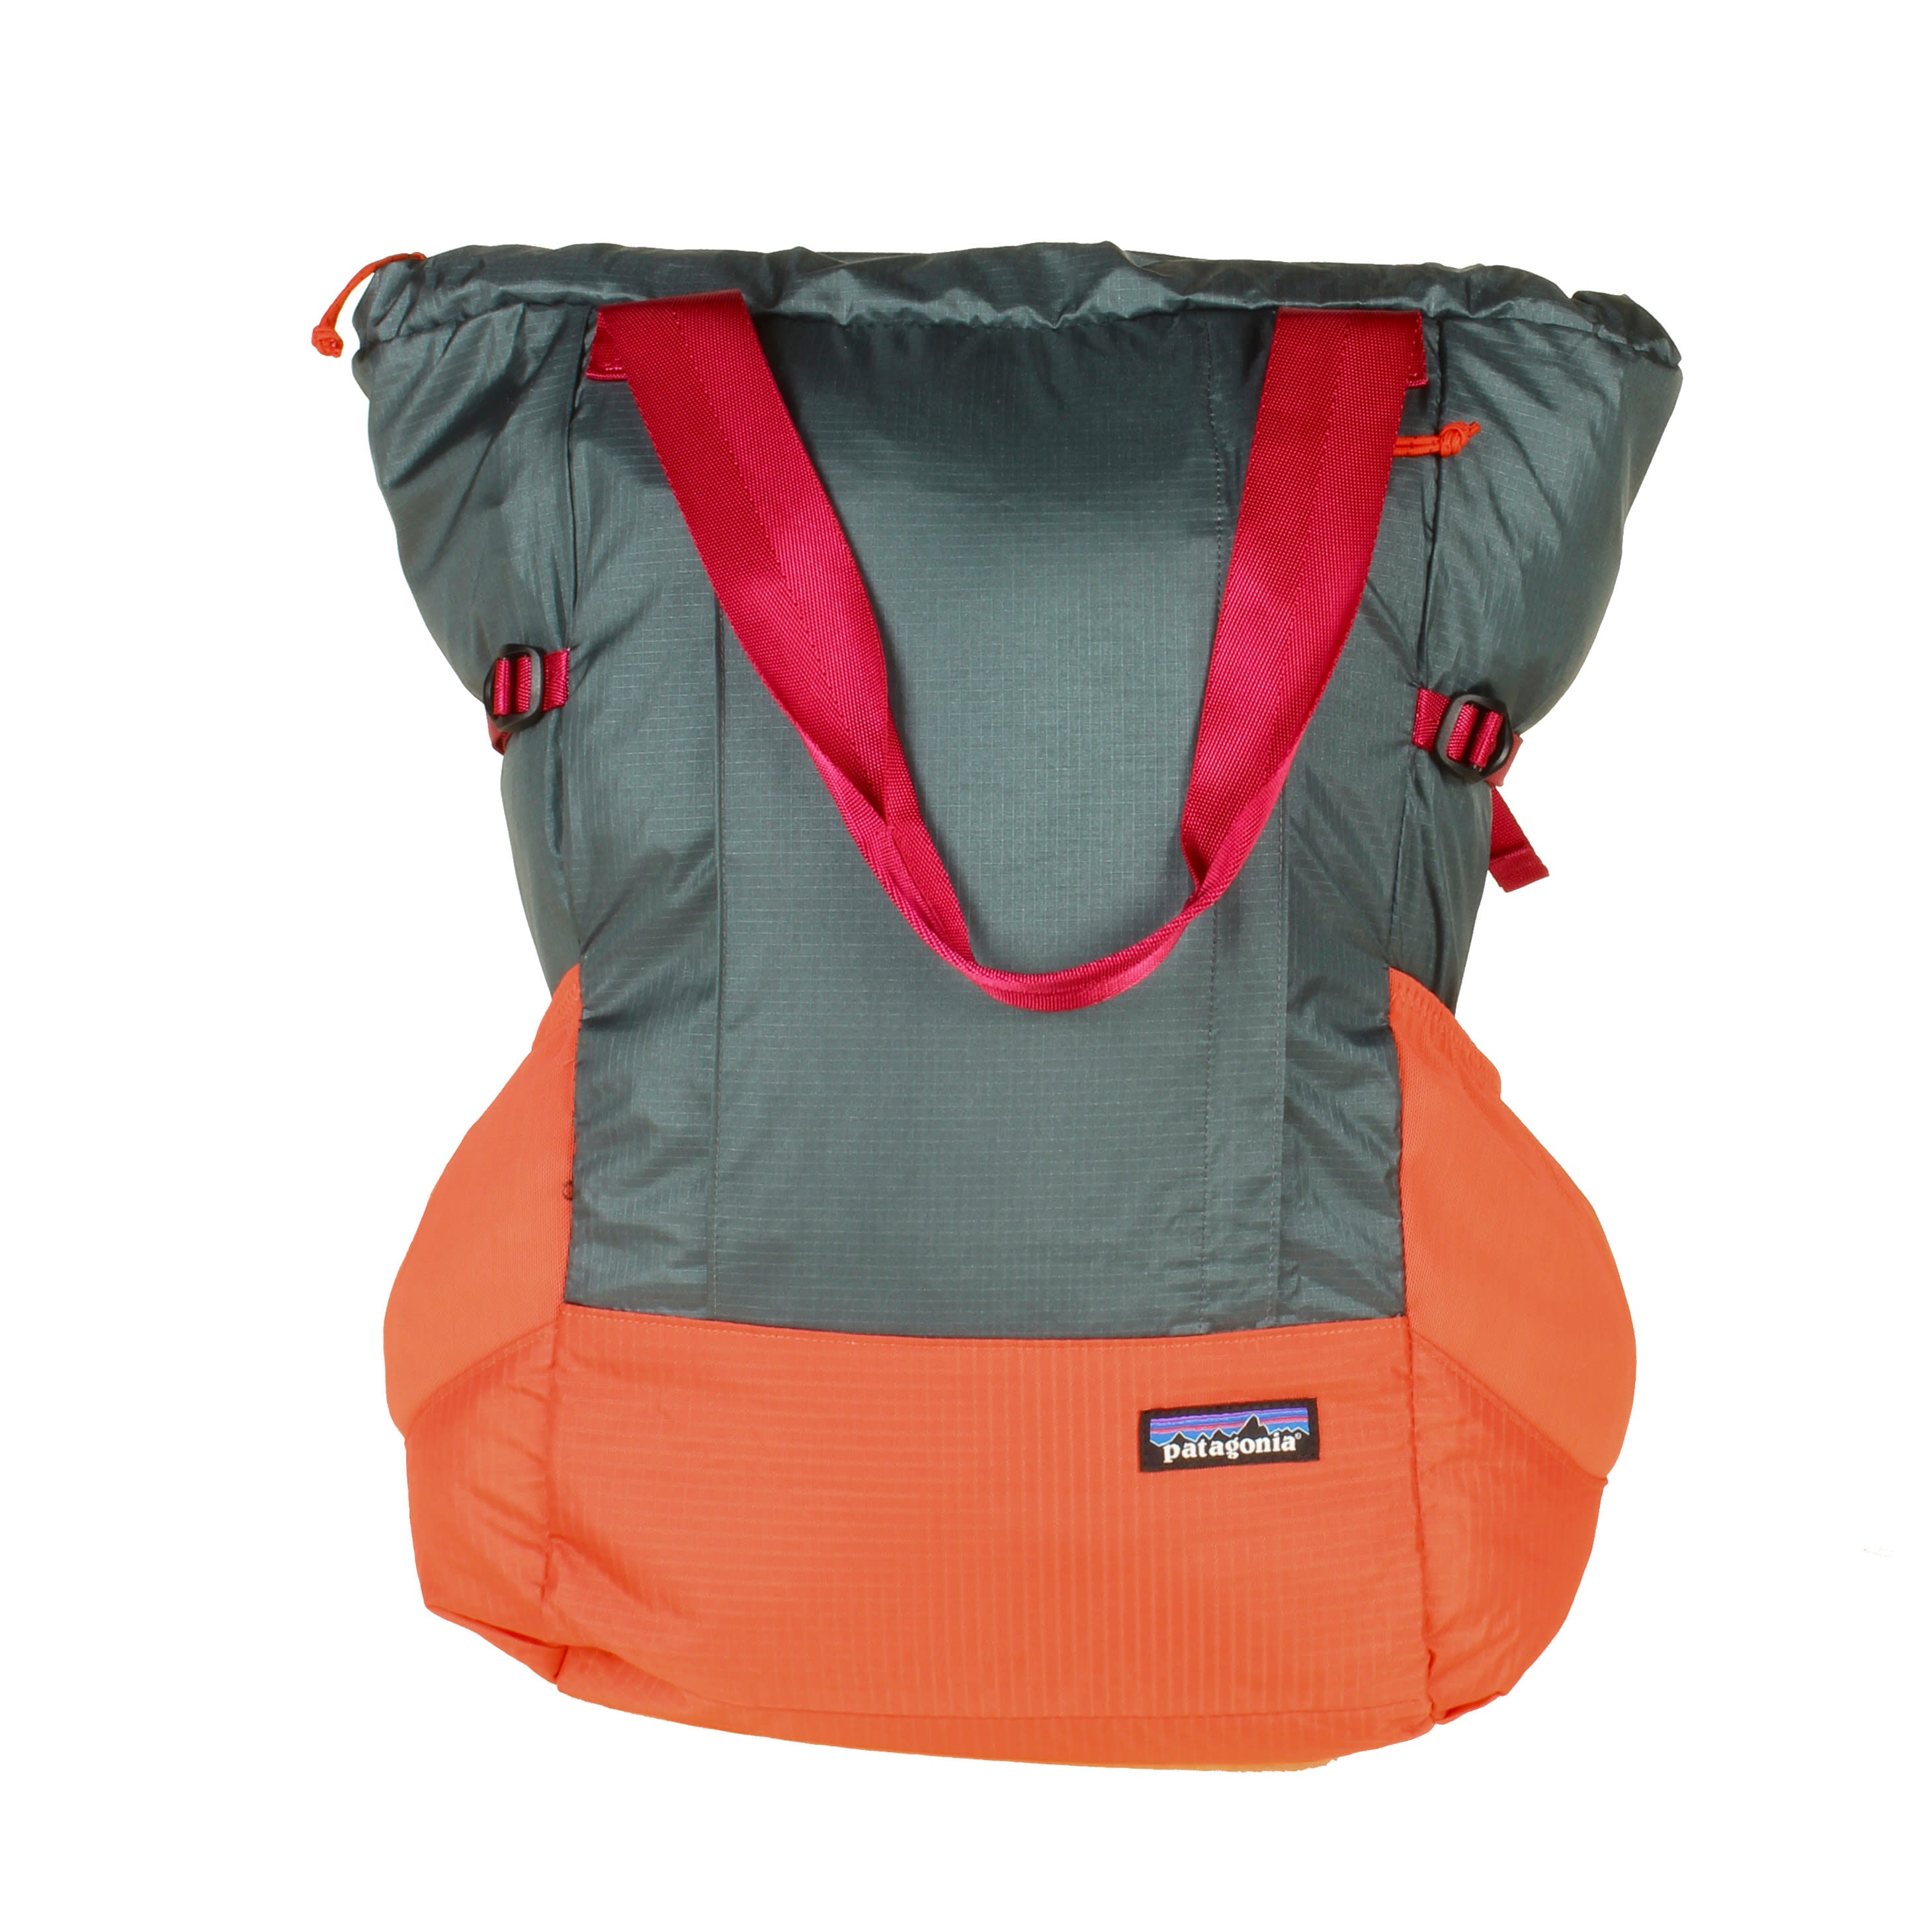 Lightweight Travel Tote Pack